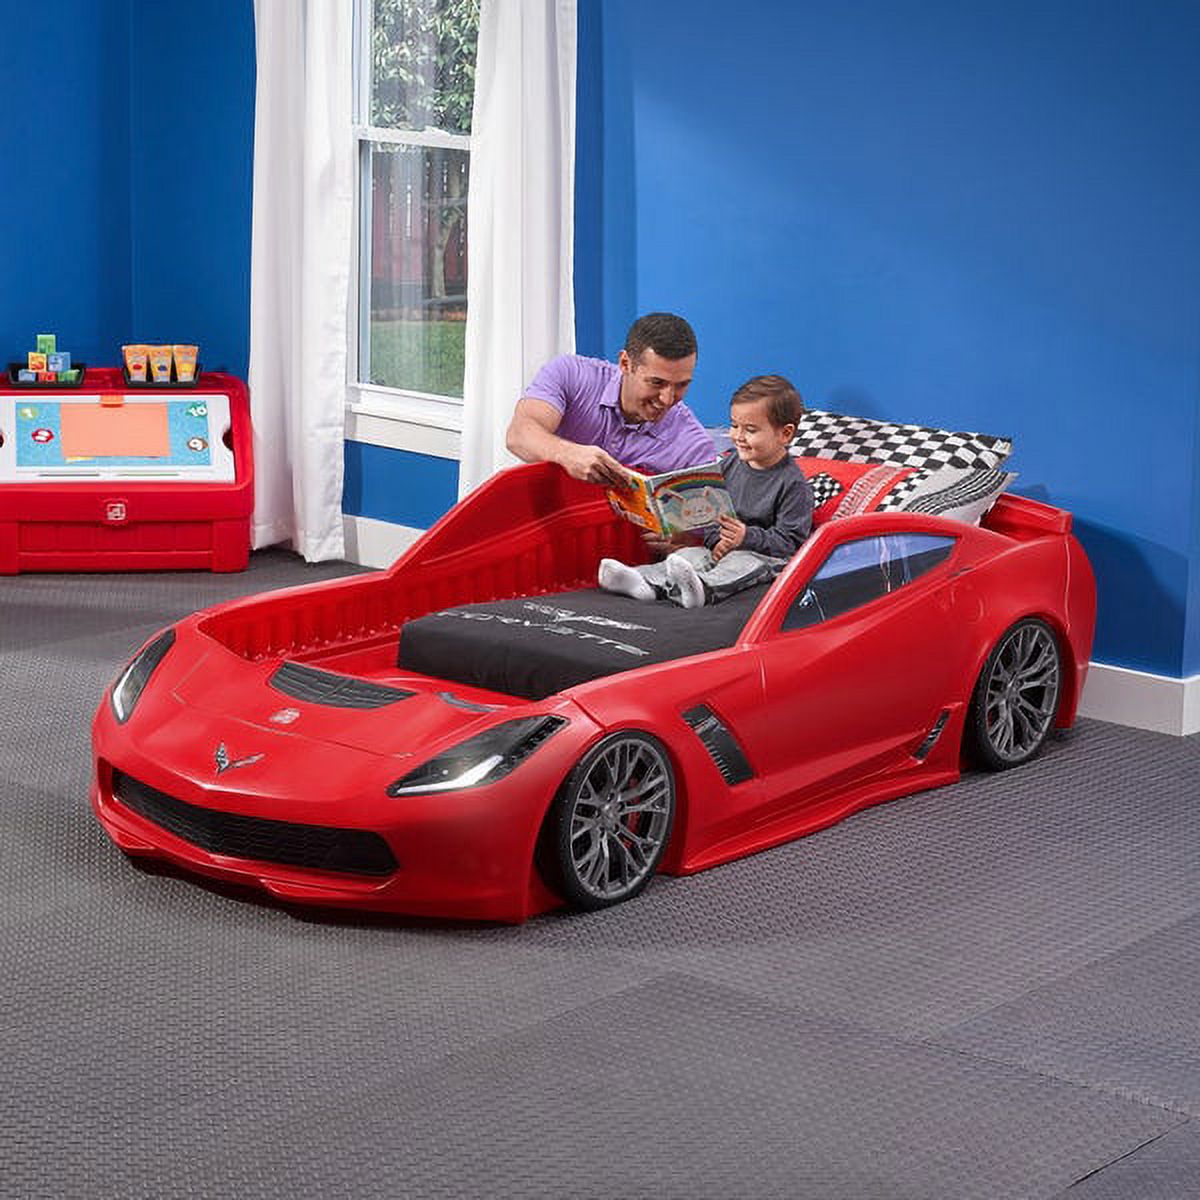 Step2 Corvette Convertible Toddler to Twin Bed with Lights, Red - image 3 of 5